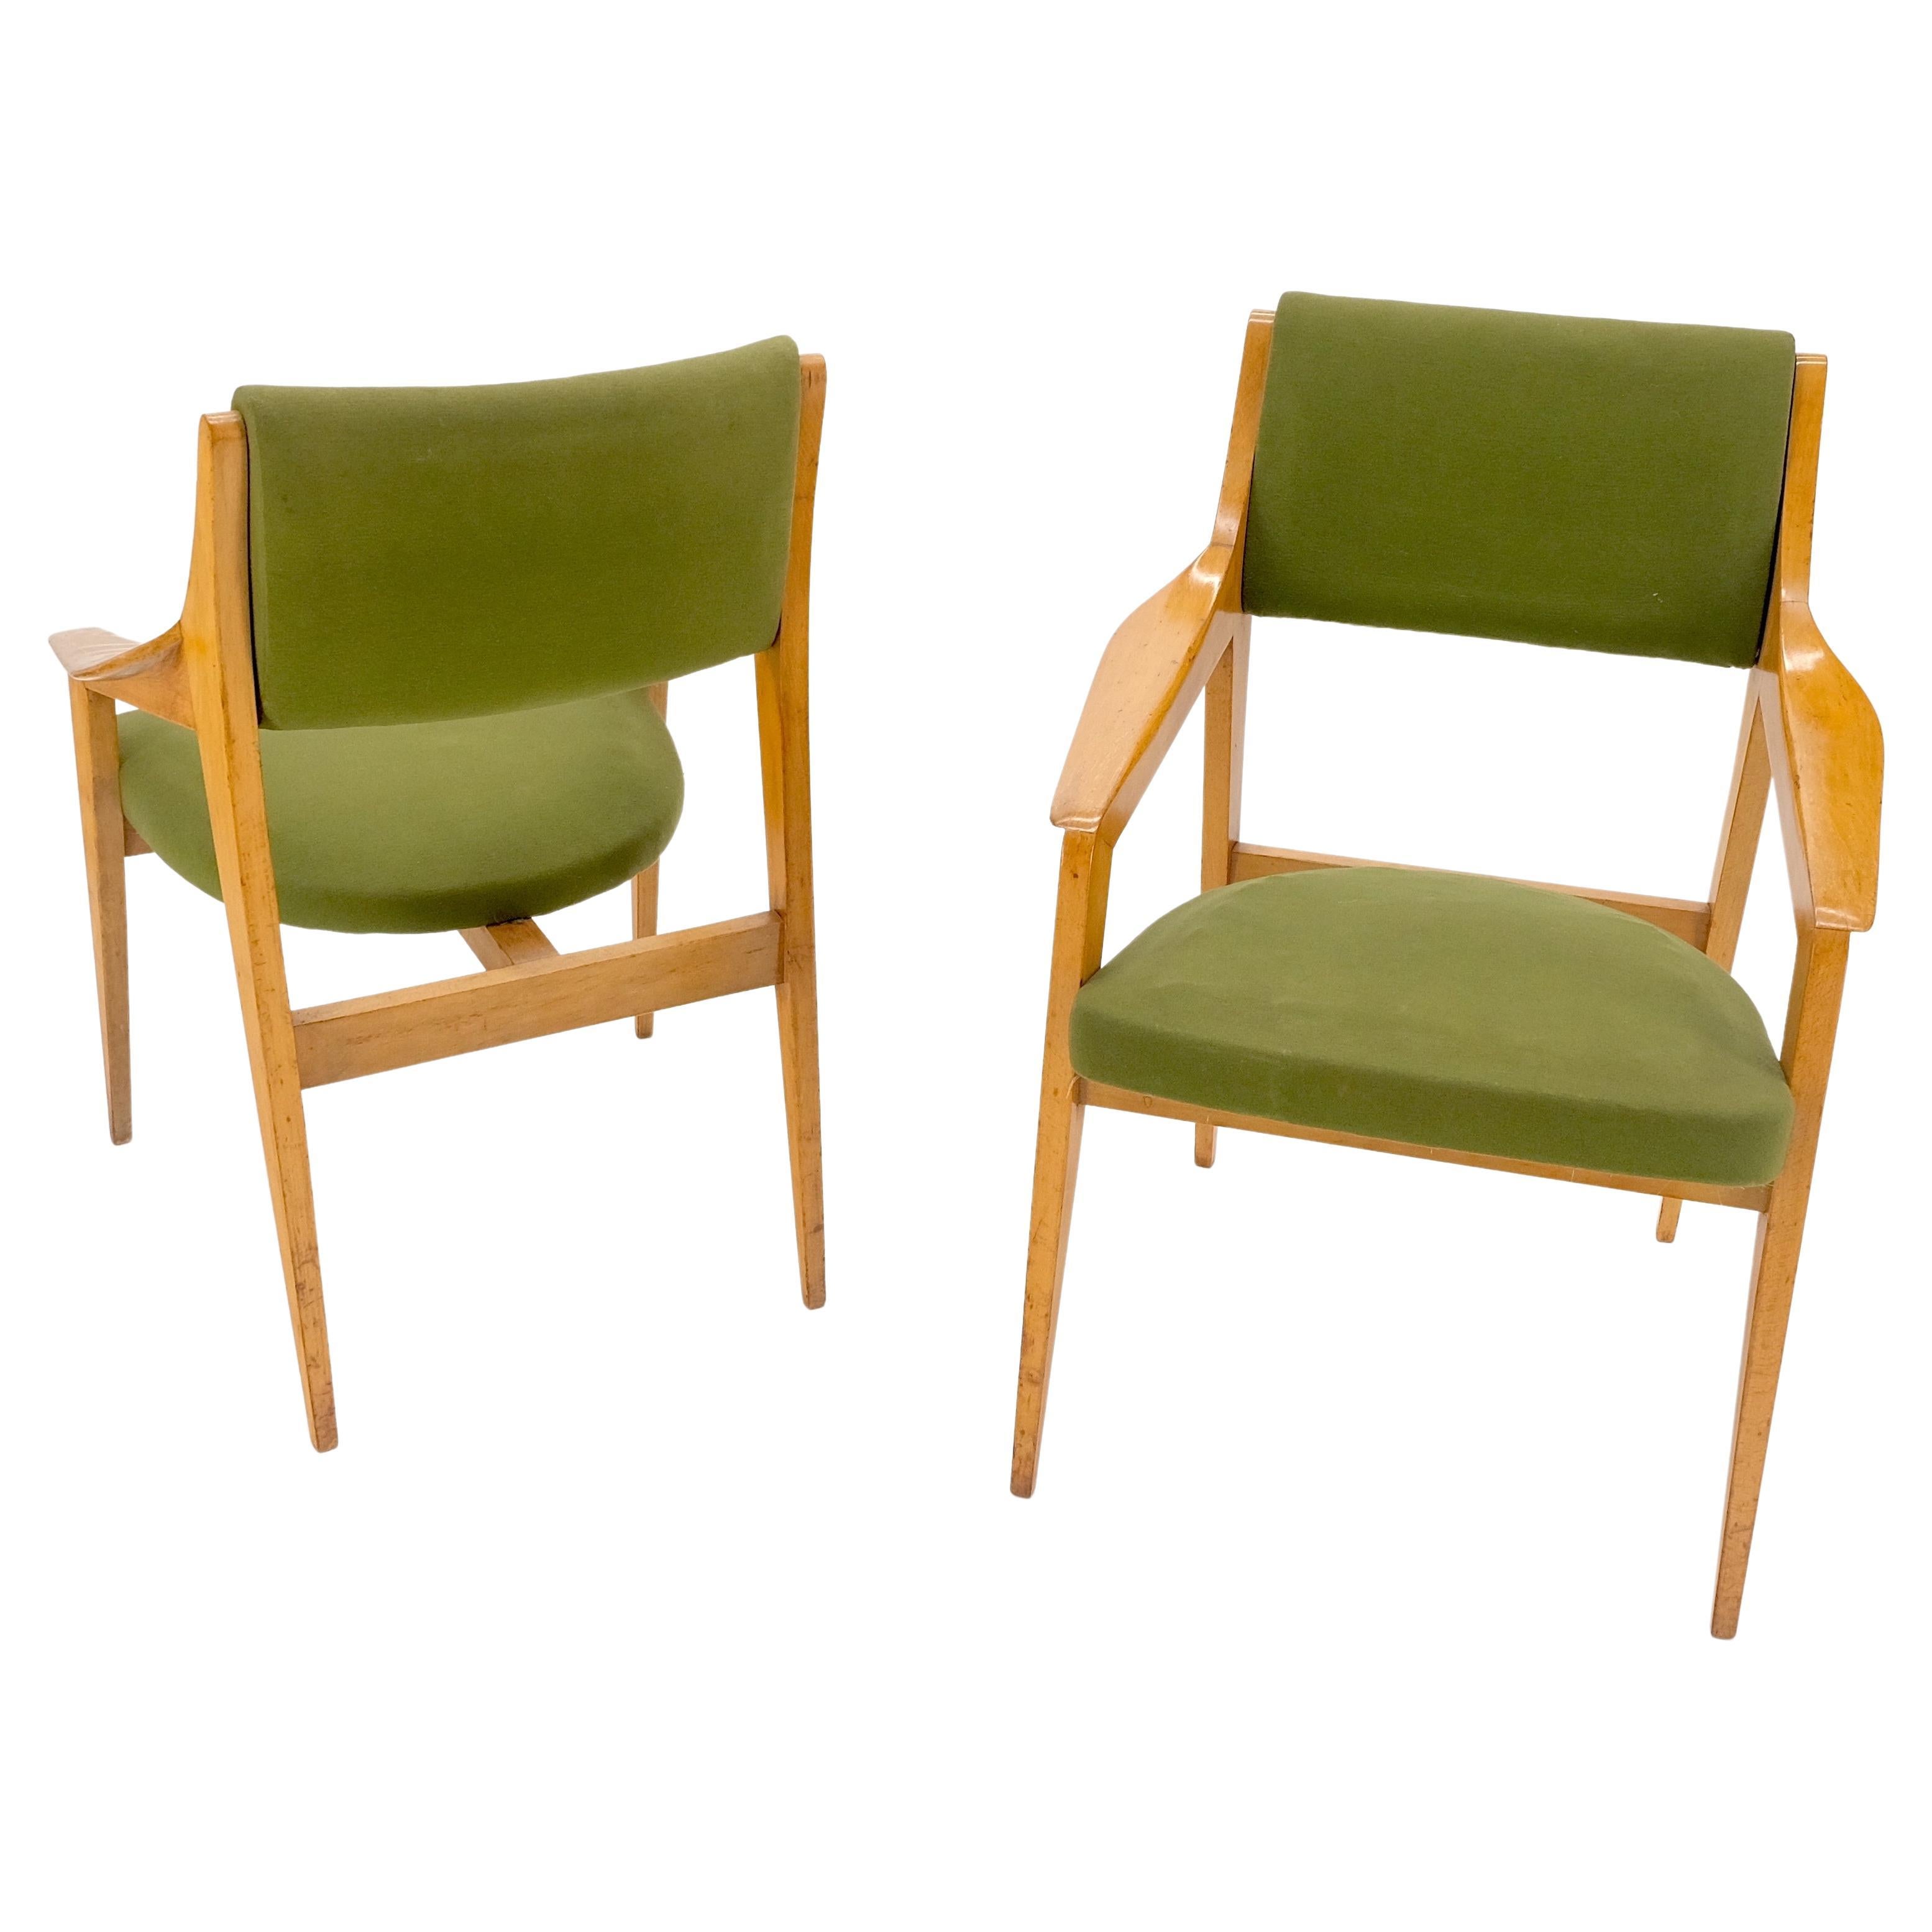 Pair of c1950s Blond Birch Scandinavian Swedish Arm Chairs Green Upholstery For Sale